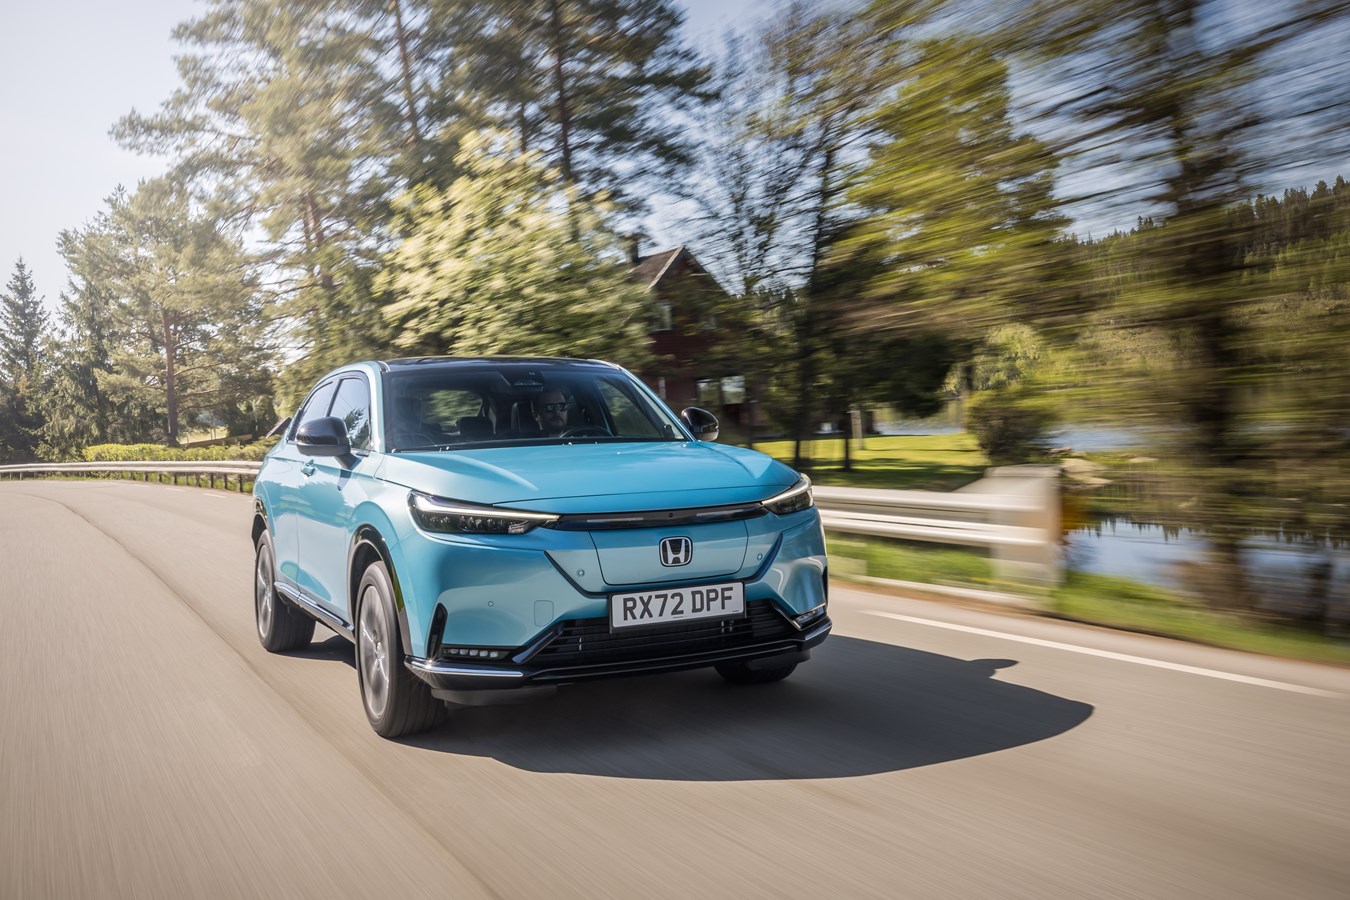 ALL-NEW HONDA e:Ny1 ELECTRIC SUV PRICED FROM £44,995 OTR WITH SERVICE PLAN & EXTENDED GUARANTEE